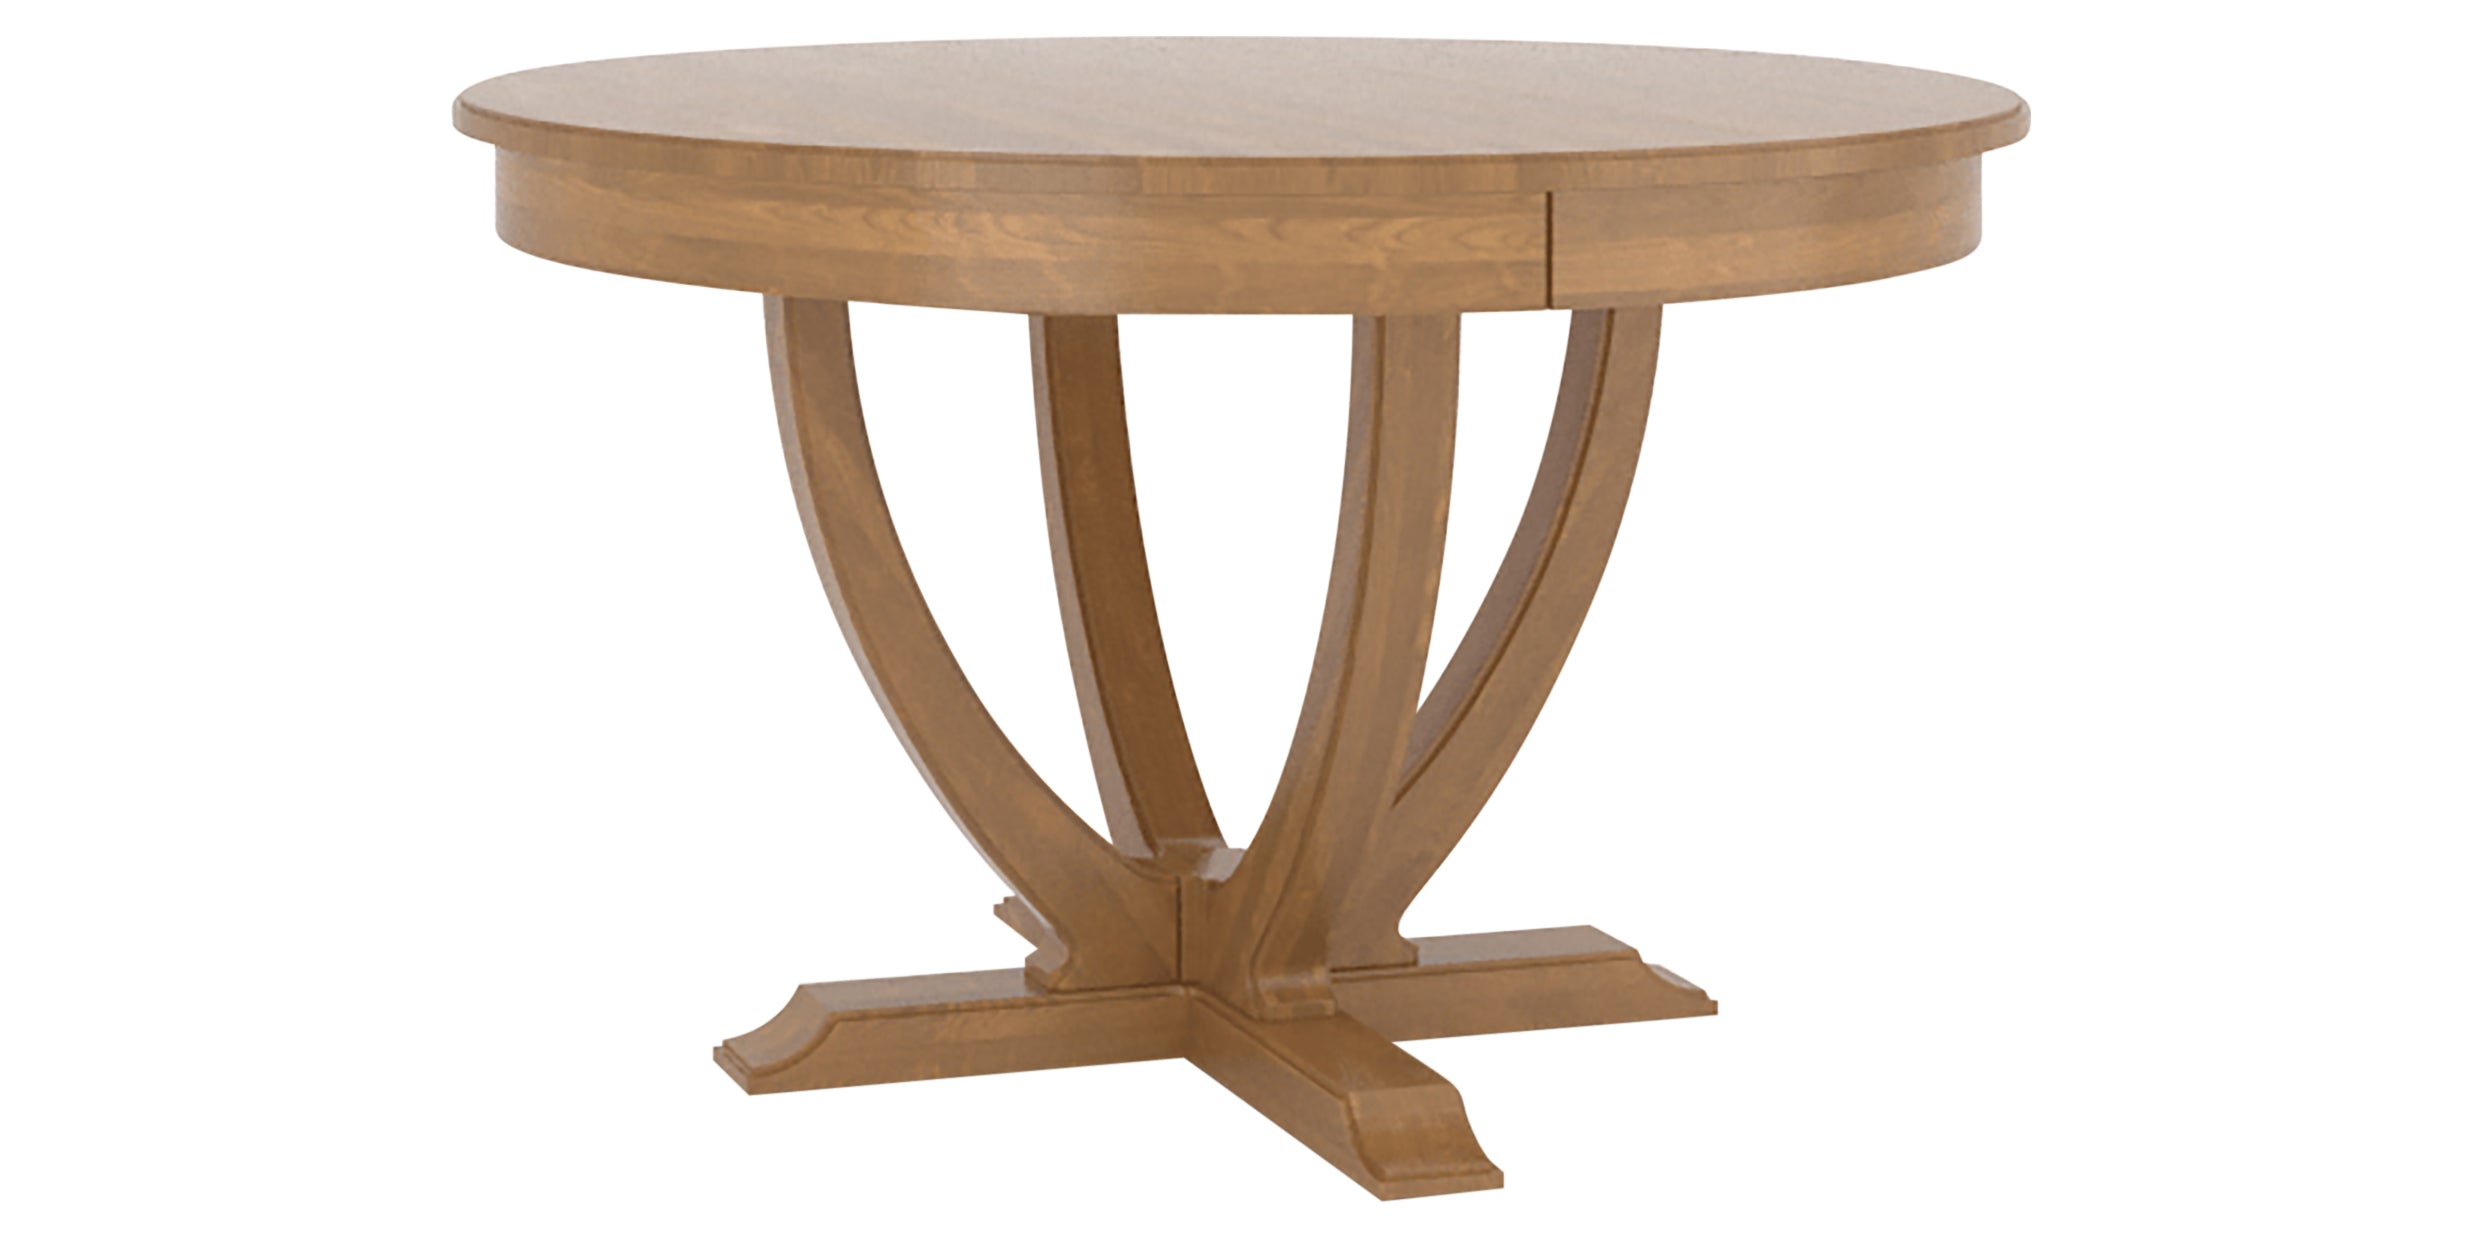 Honey Washed | Canadel Core Dining Table 4848 | Valley Ridge Furniture